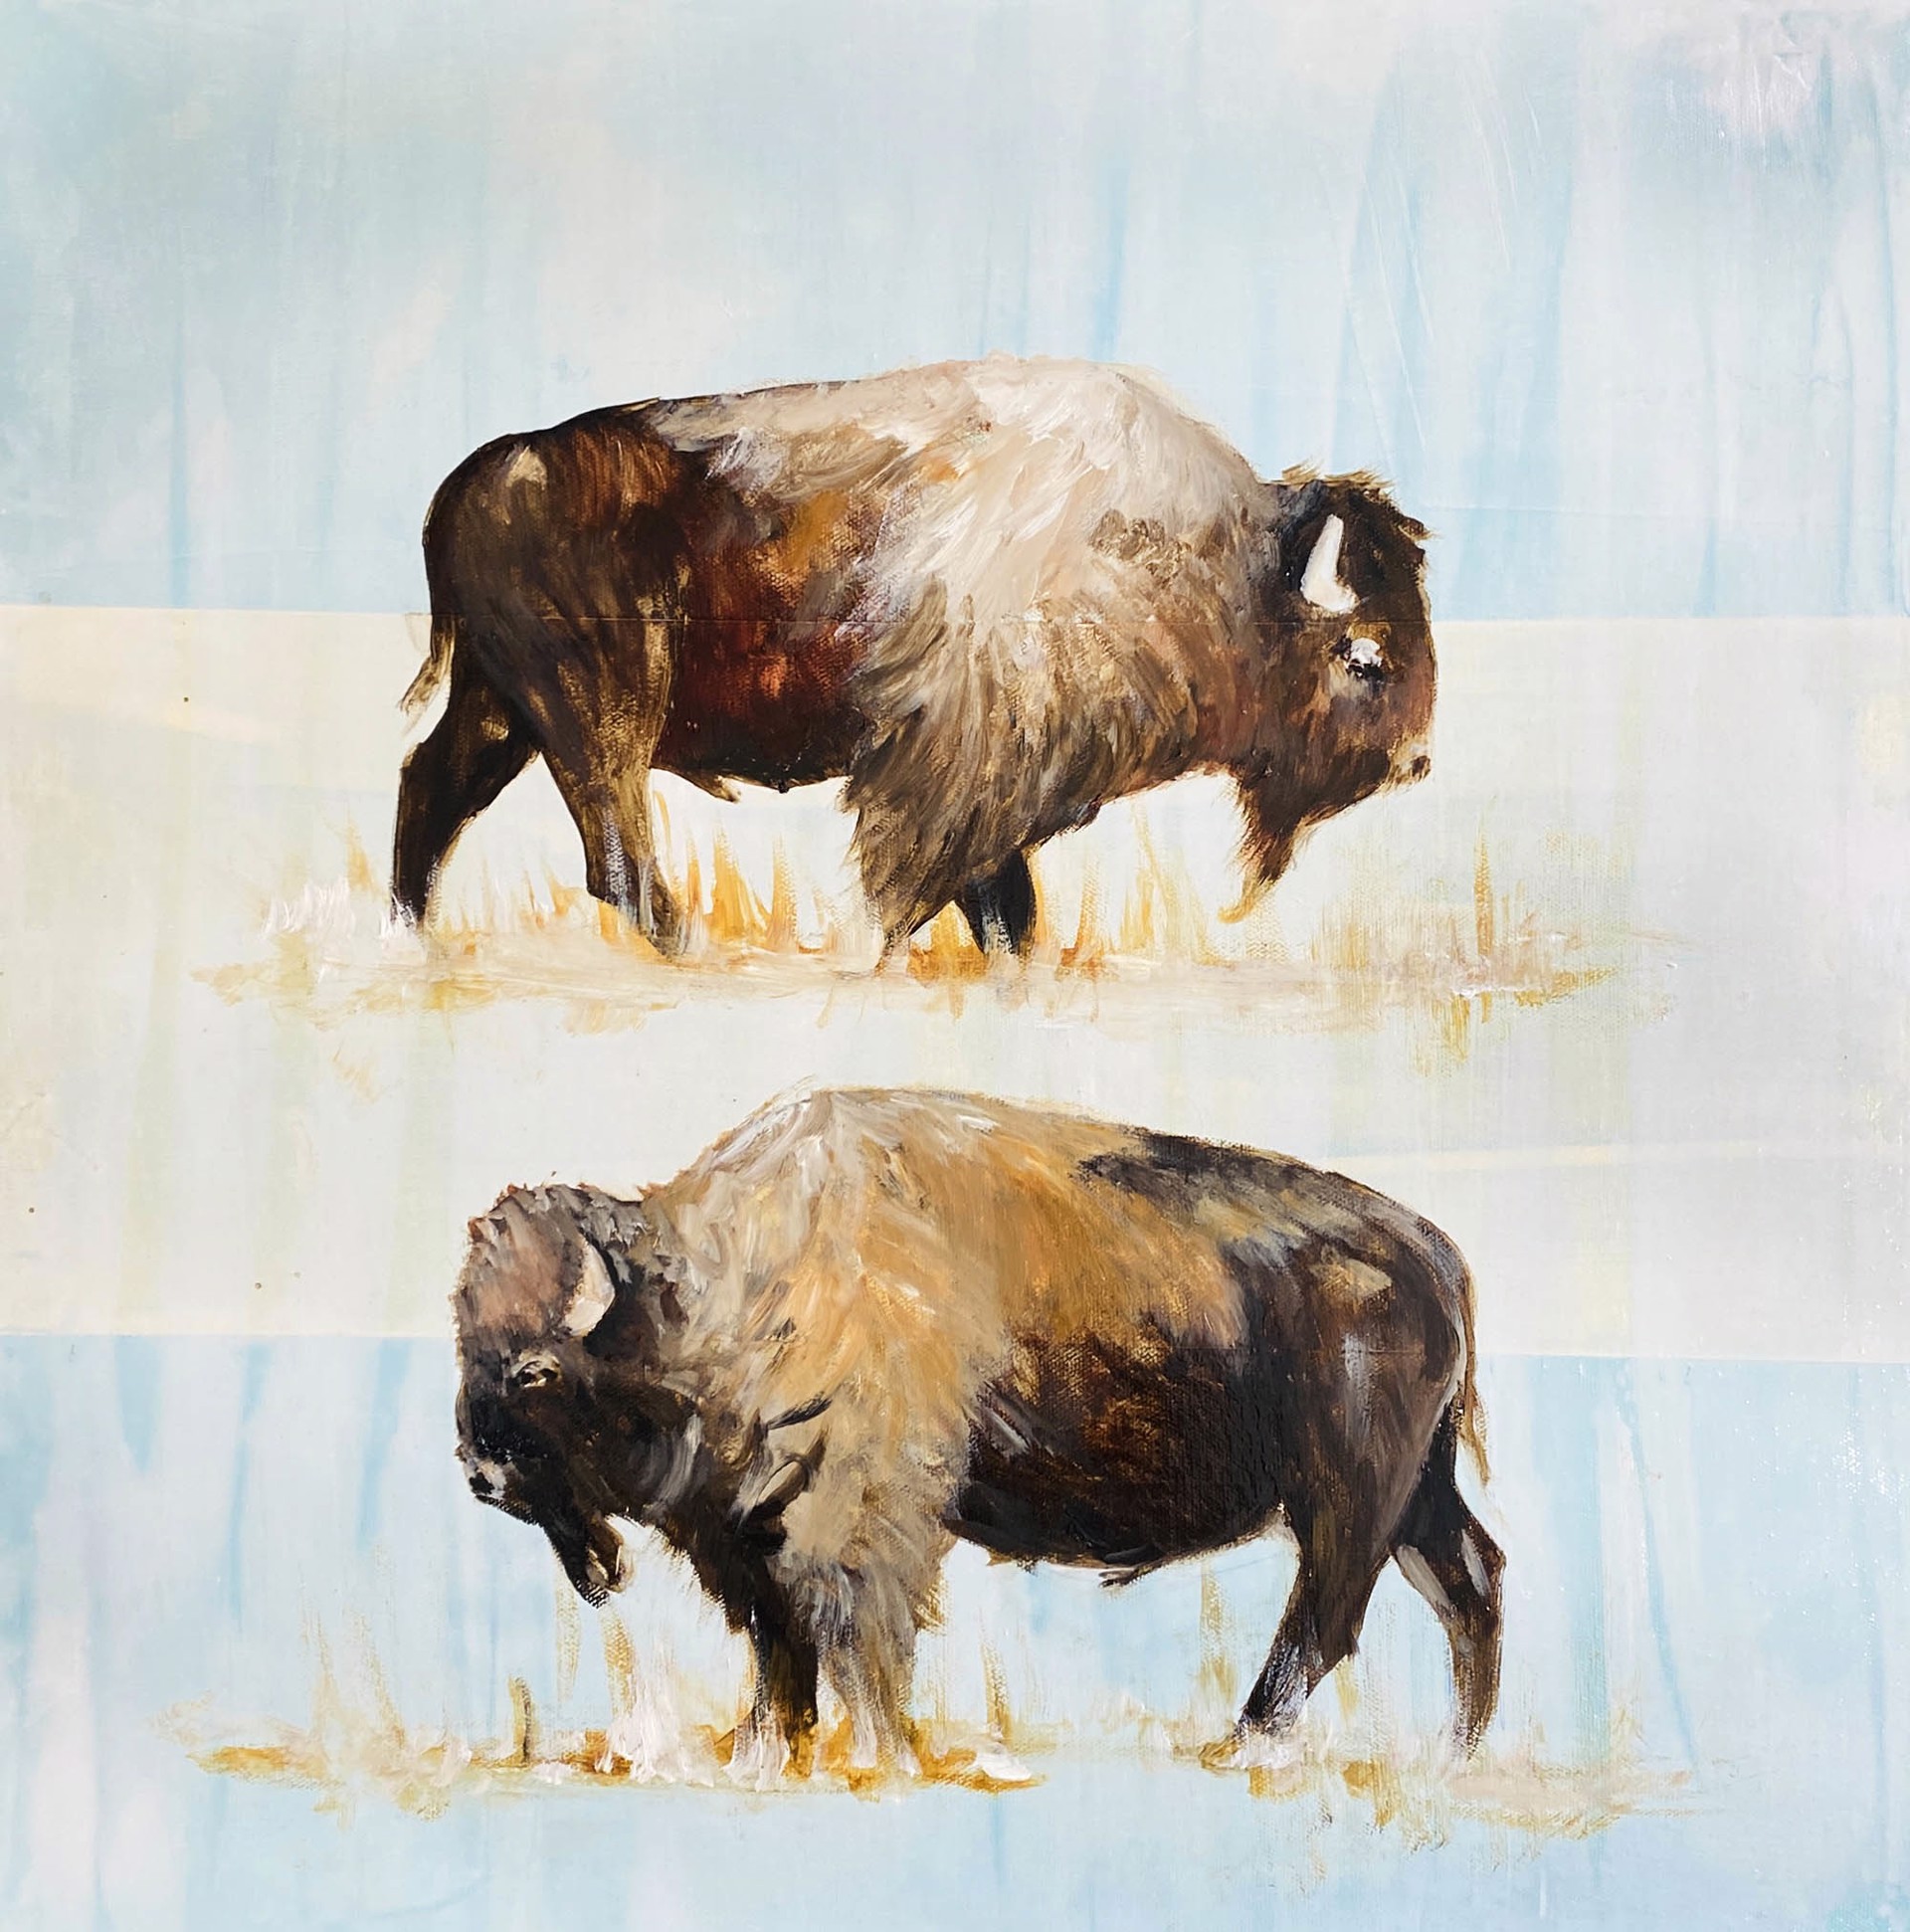 Original Oil Painting Featuring Two Bison Walking In Opposite Directions Over Abstract And Graphic Striped Background